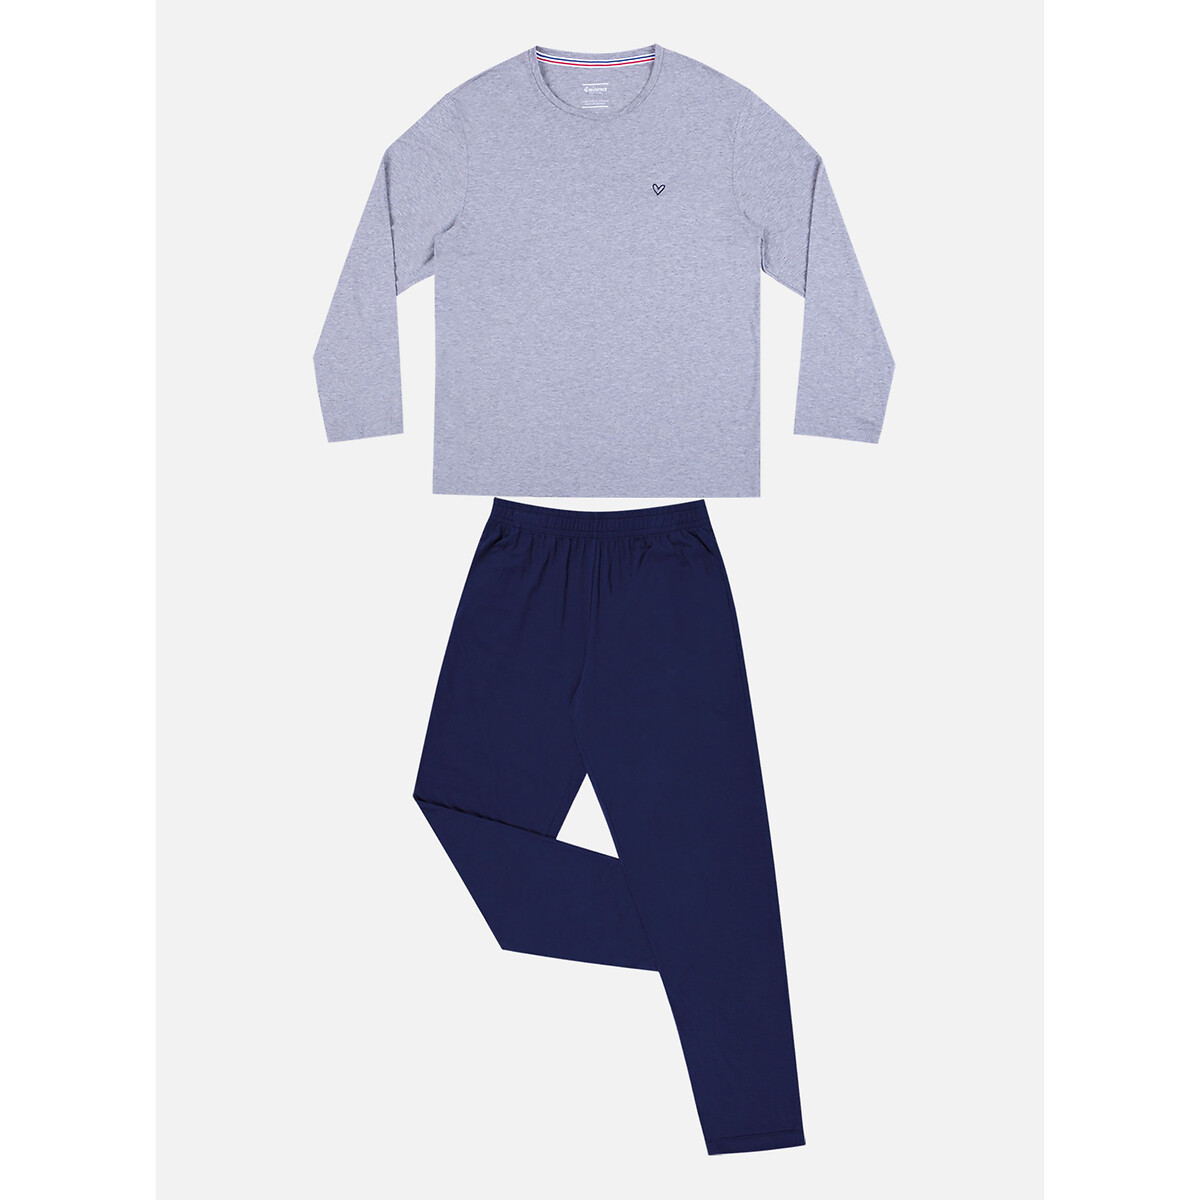 Image of Cotton Crew Neck Pyjamas, Made in France